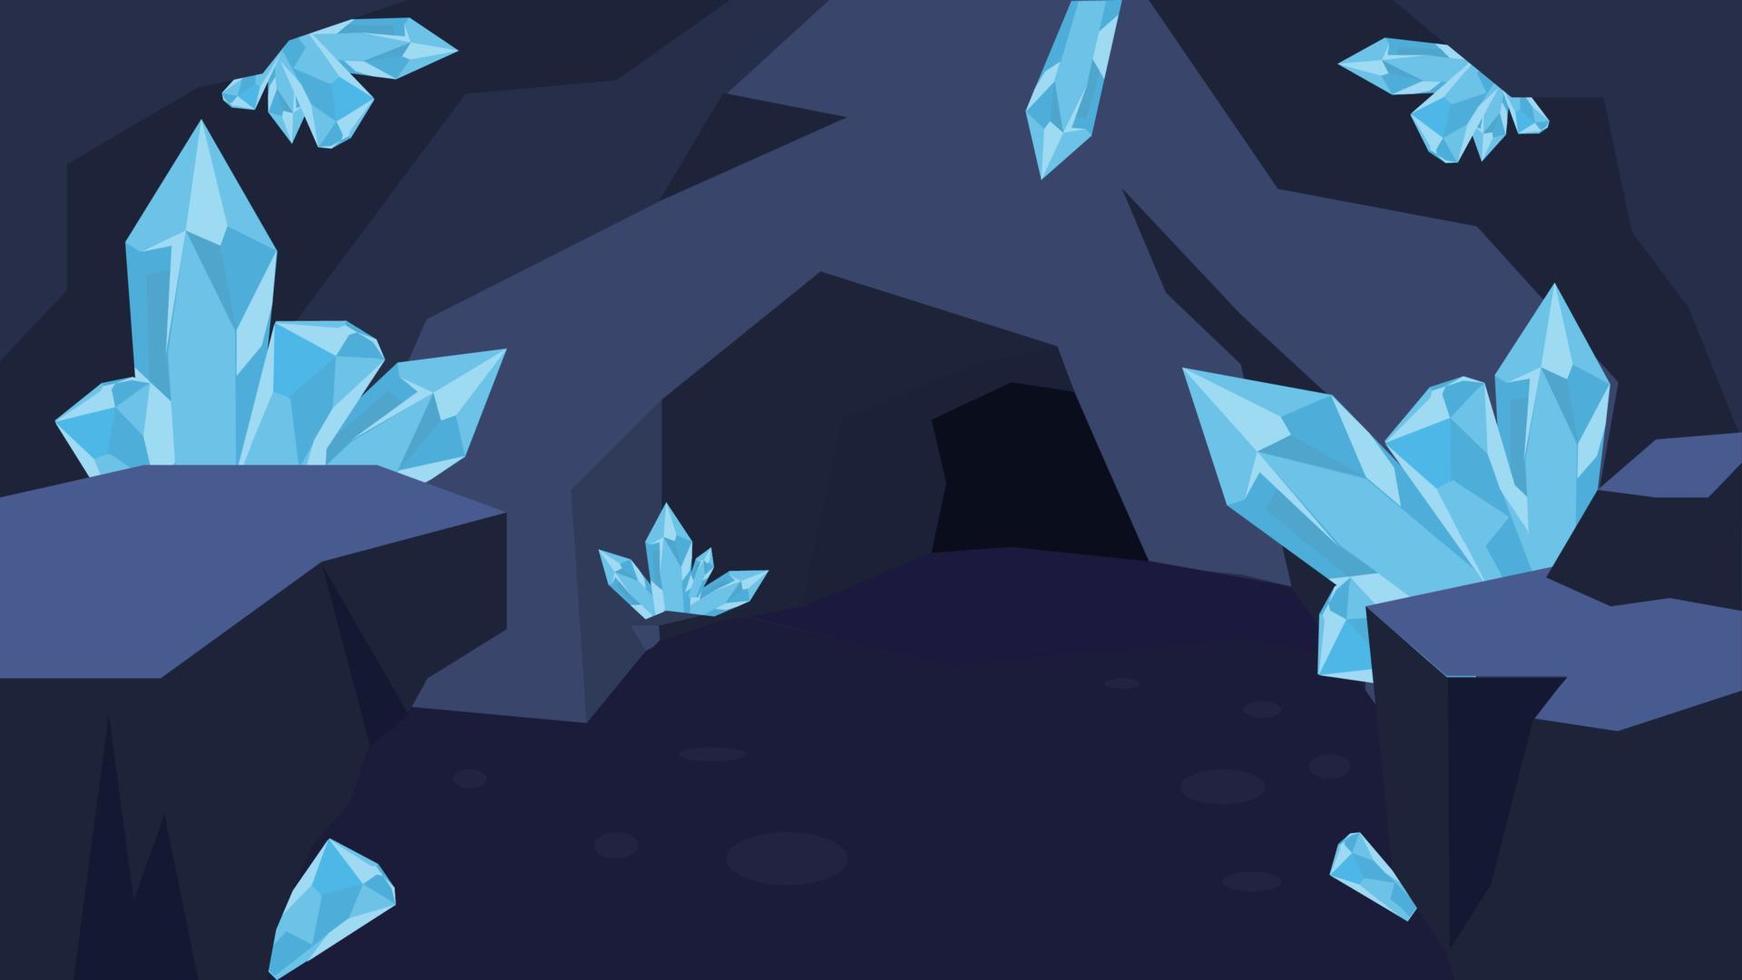 Crystal in cave flat illustration vector